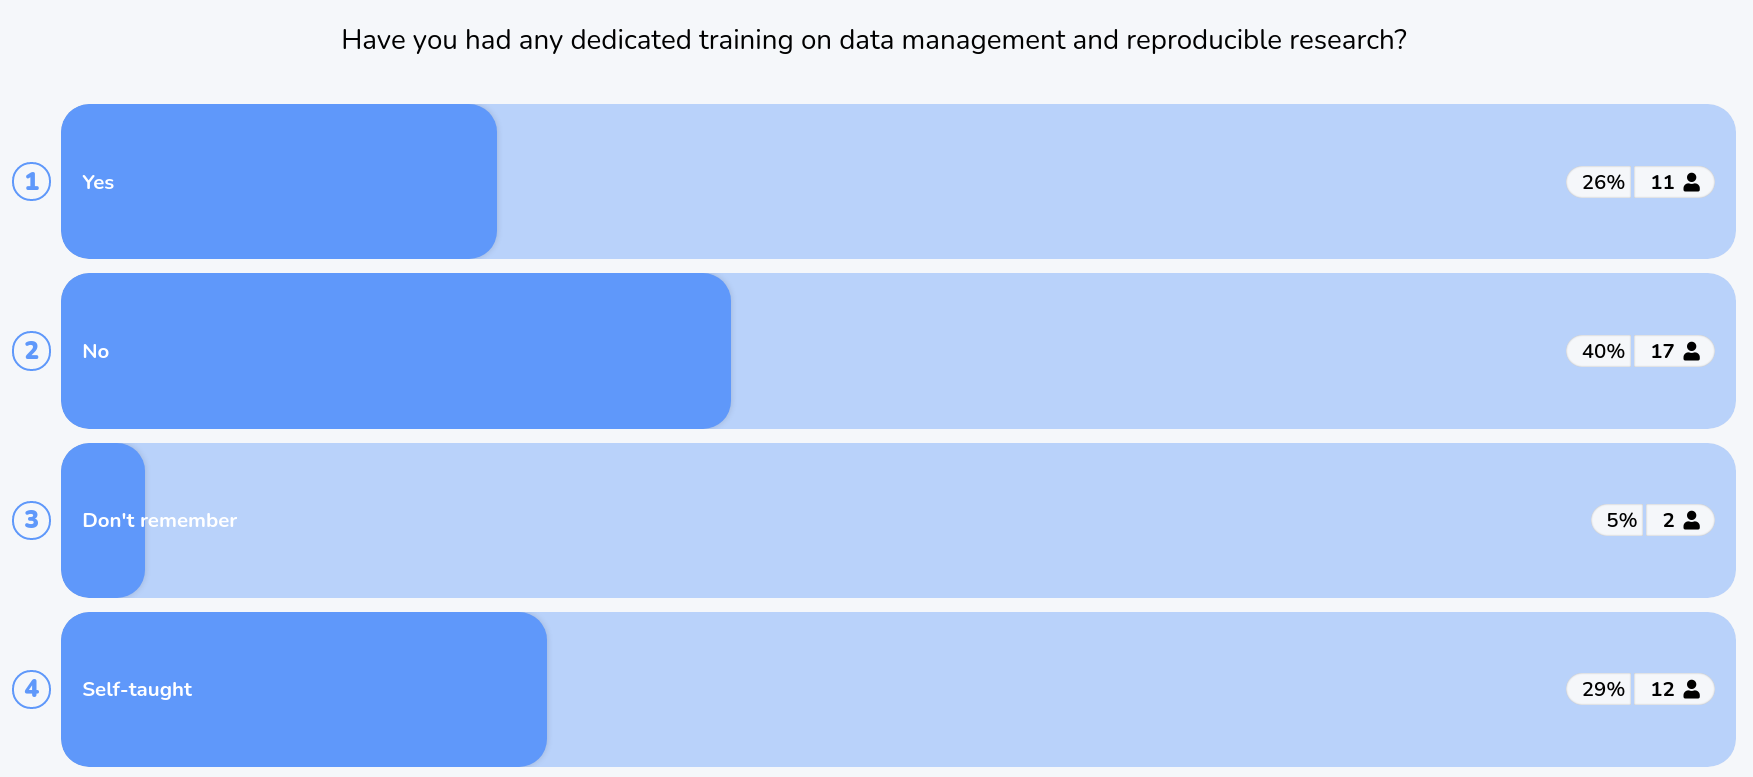 Have you had any dedicated training on data management?